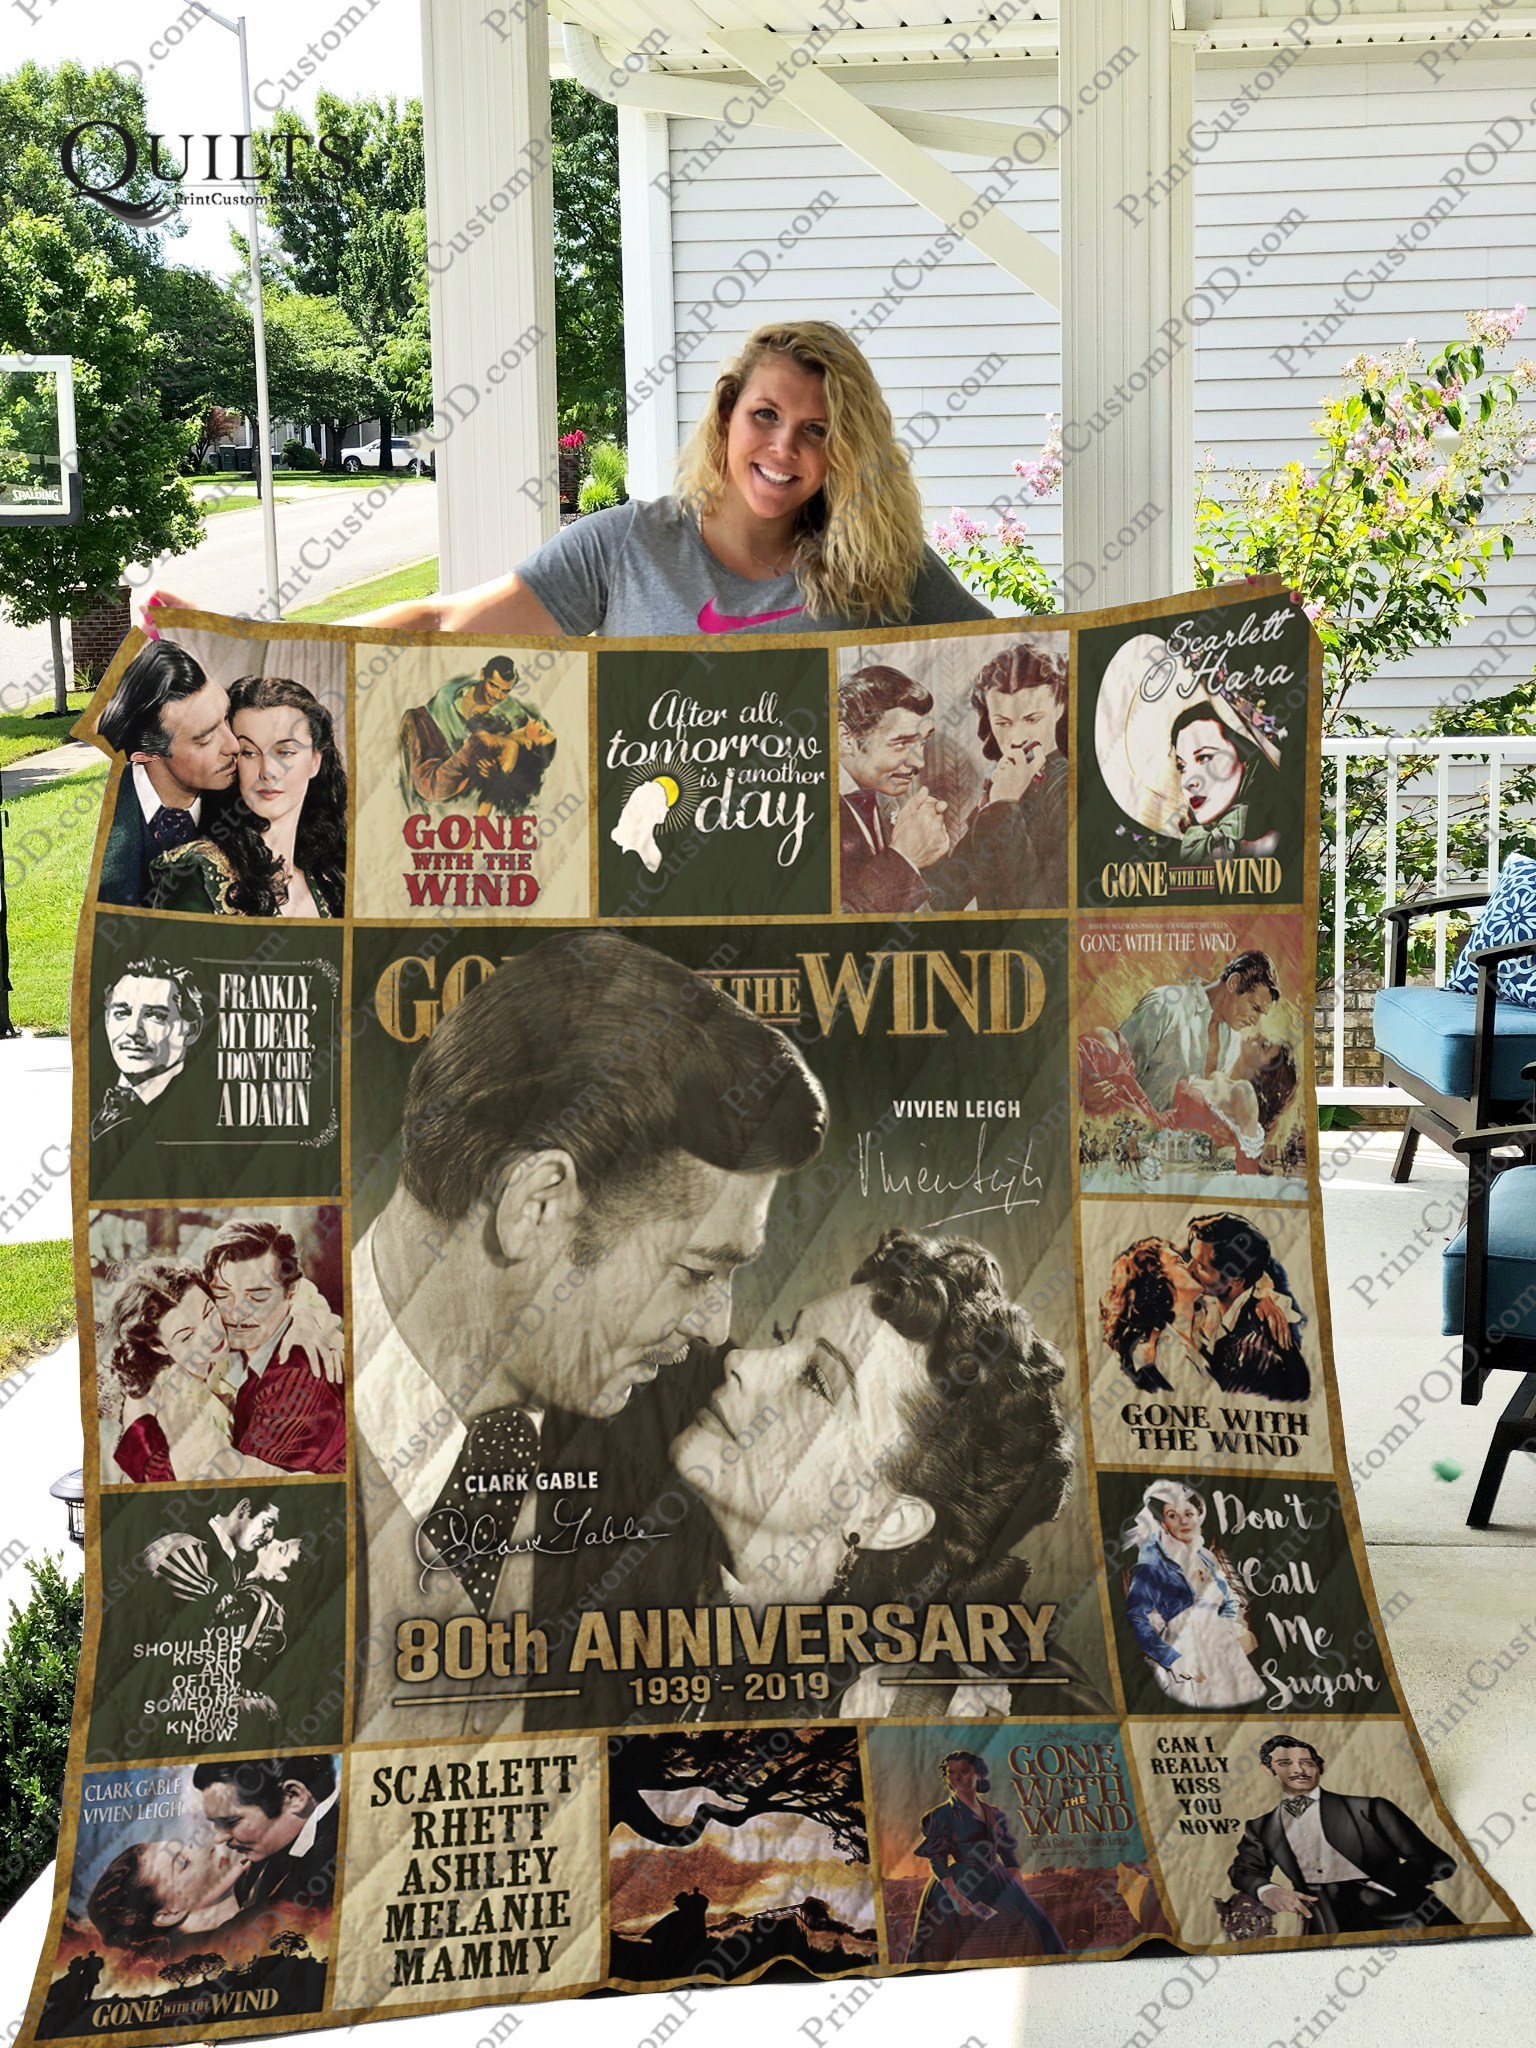 Gone with the wind 80th anniversary quilt 1